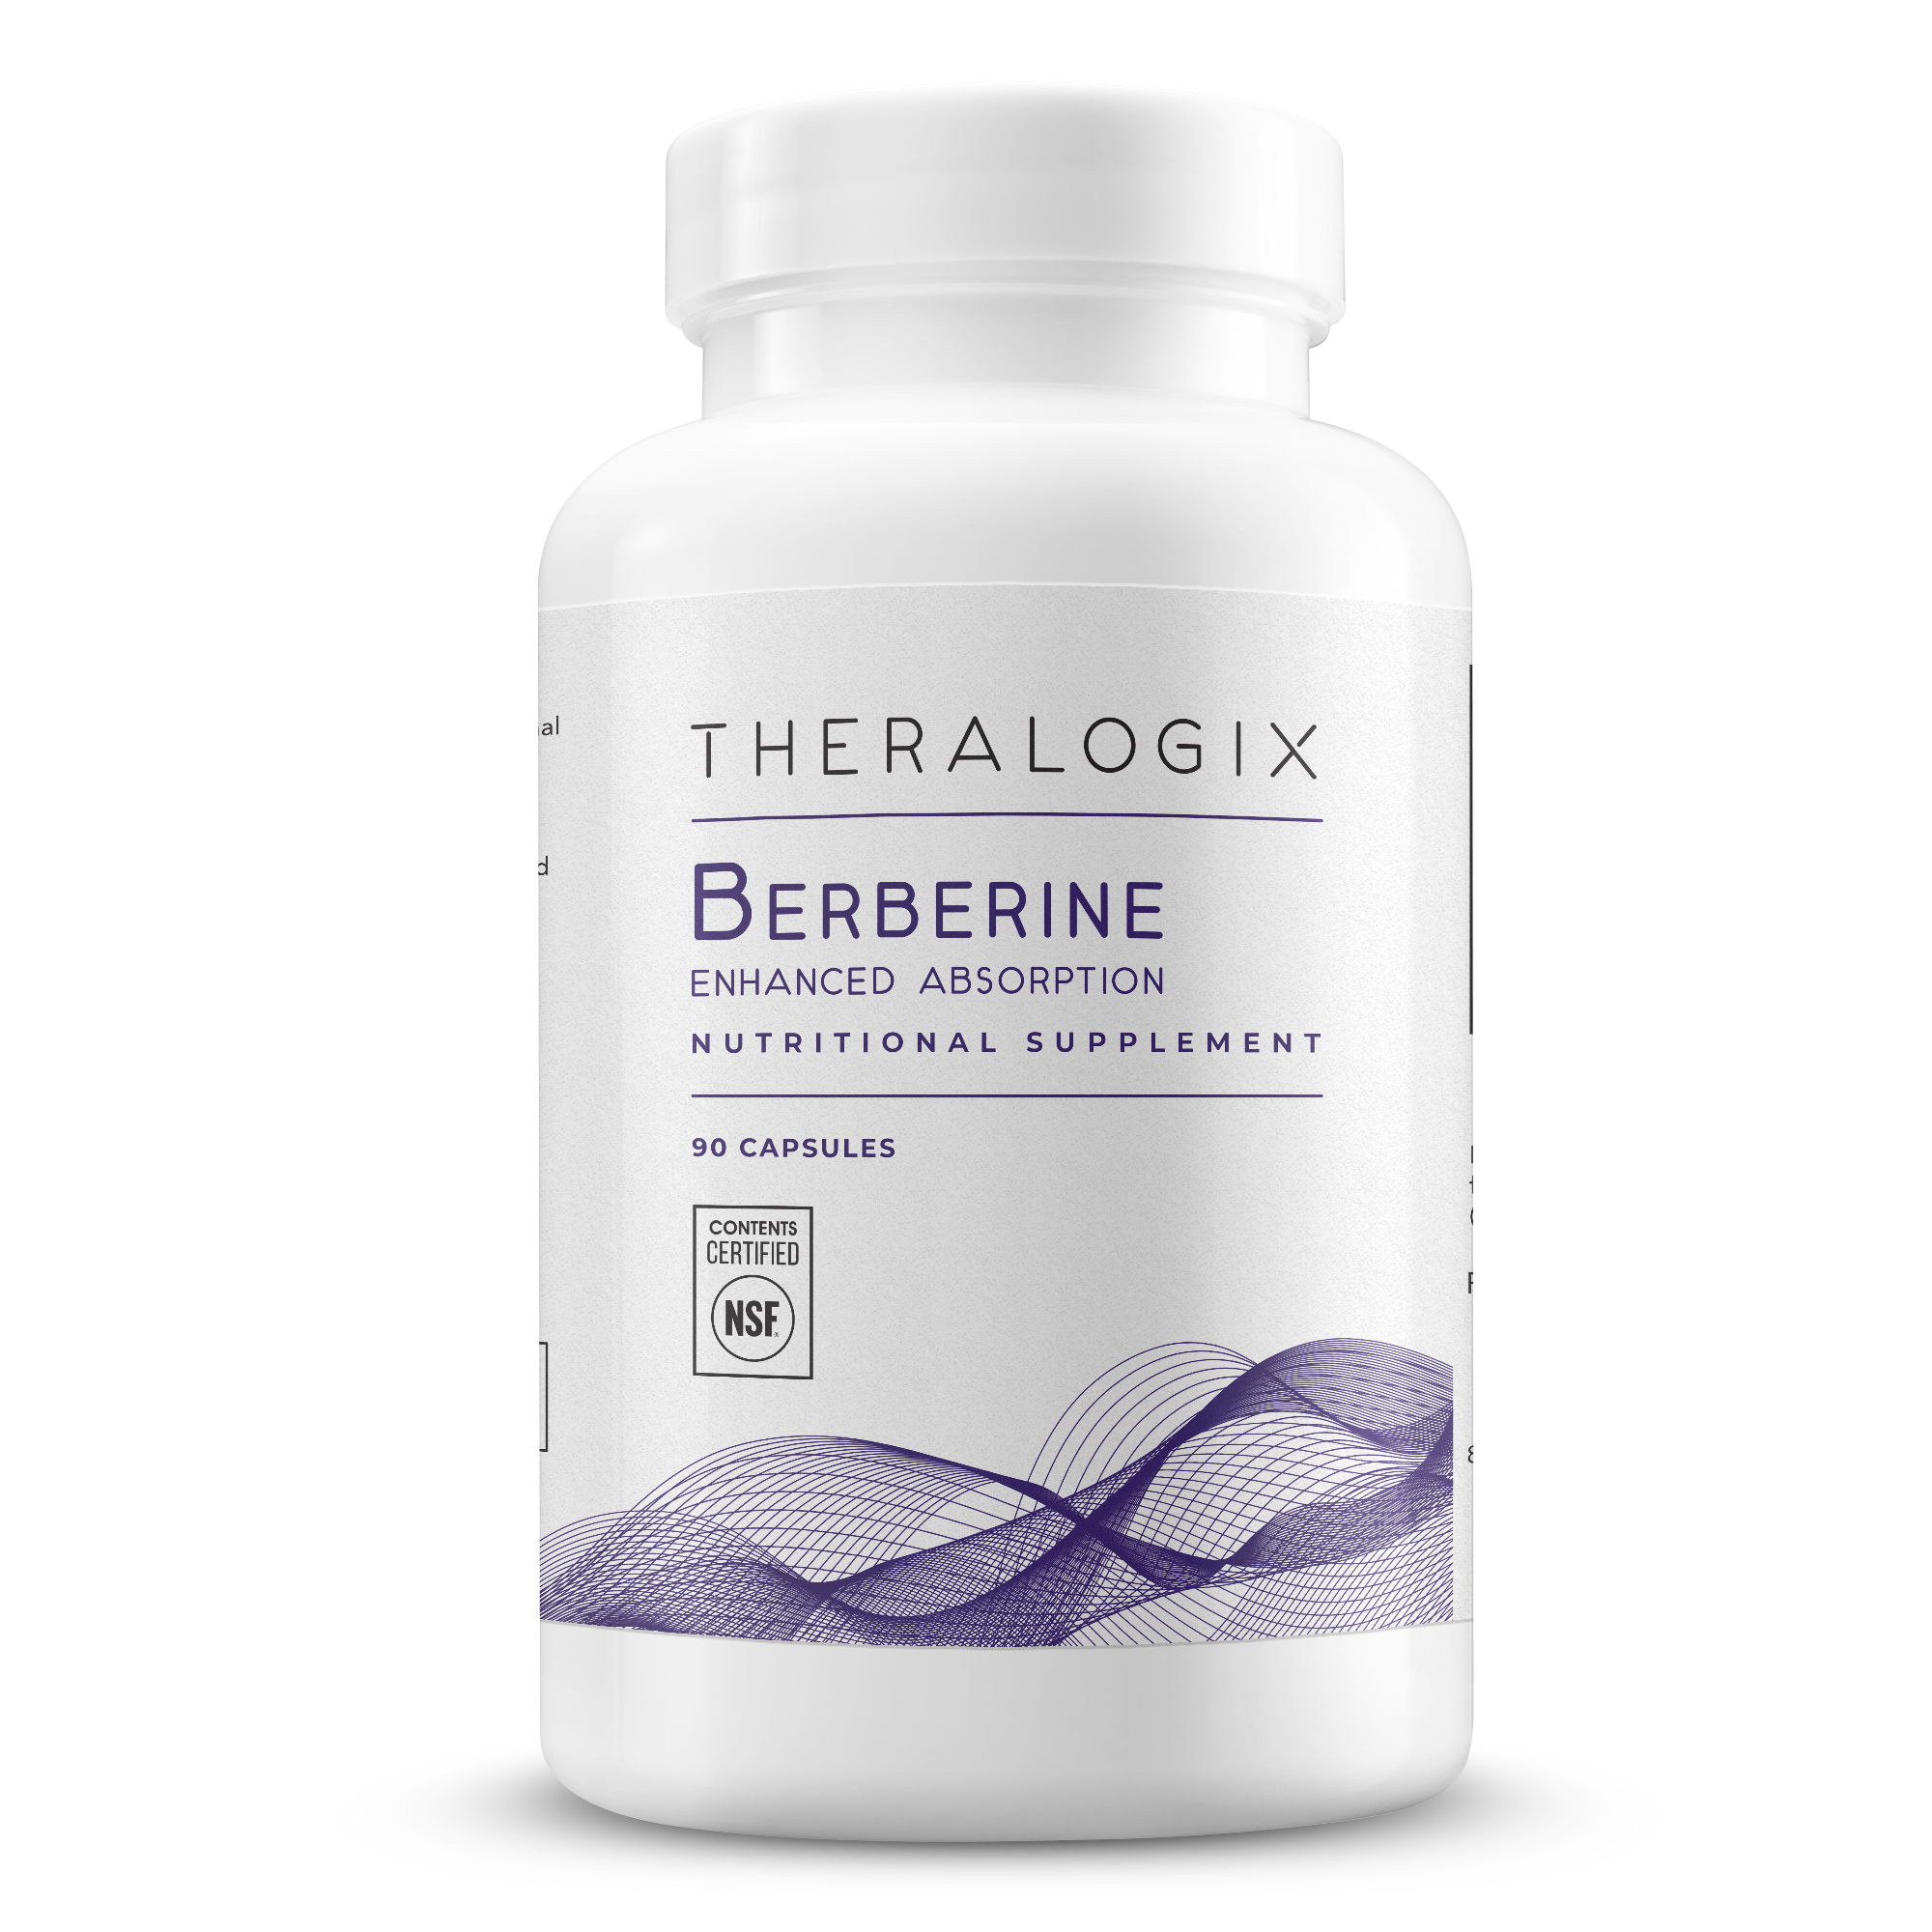 Berberine Enhanced Absorption is formulated with berberine phytosome to promote hormonal and metabolic health.